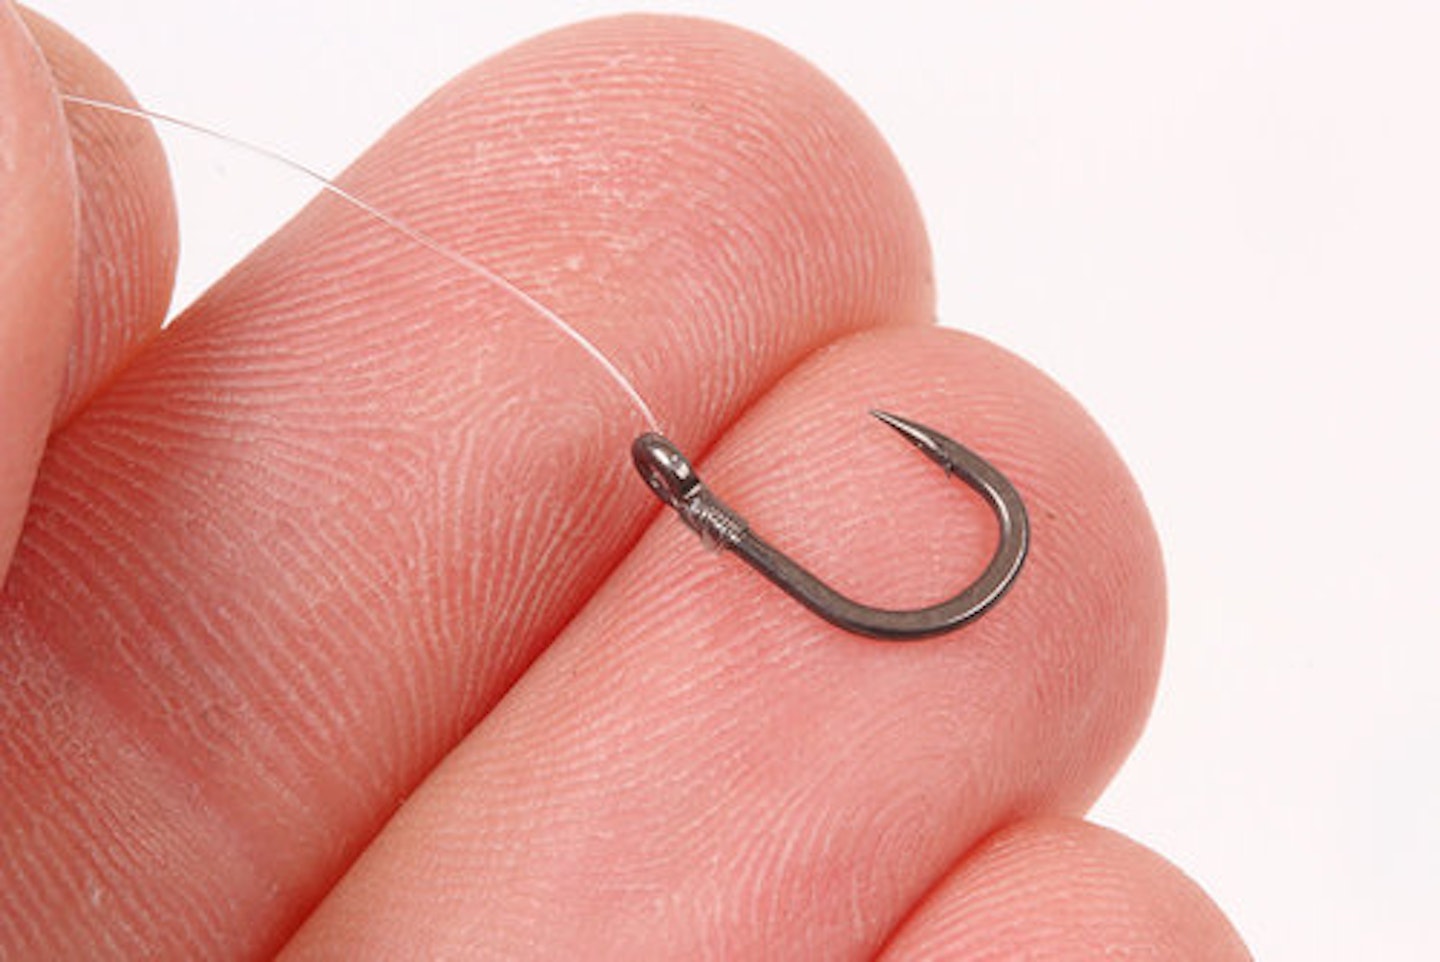 5. Tie a size 10 hook on to the hooklength using a spade-end knot that has first been passed through the eye. This is a very strong knot, ideal for hook with large eyes 